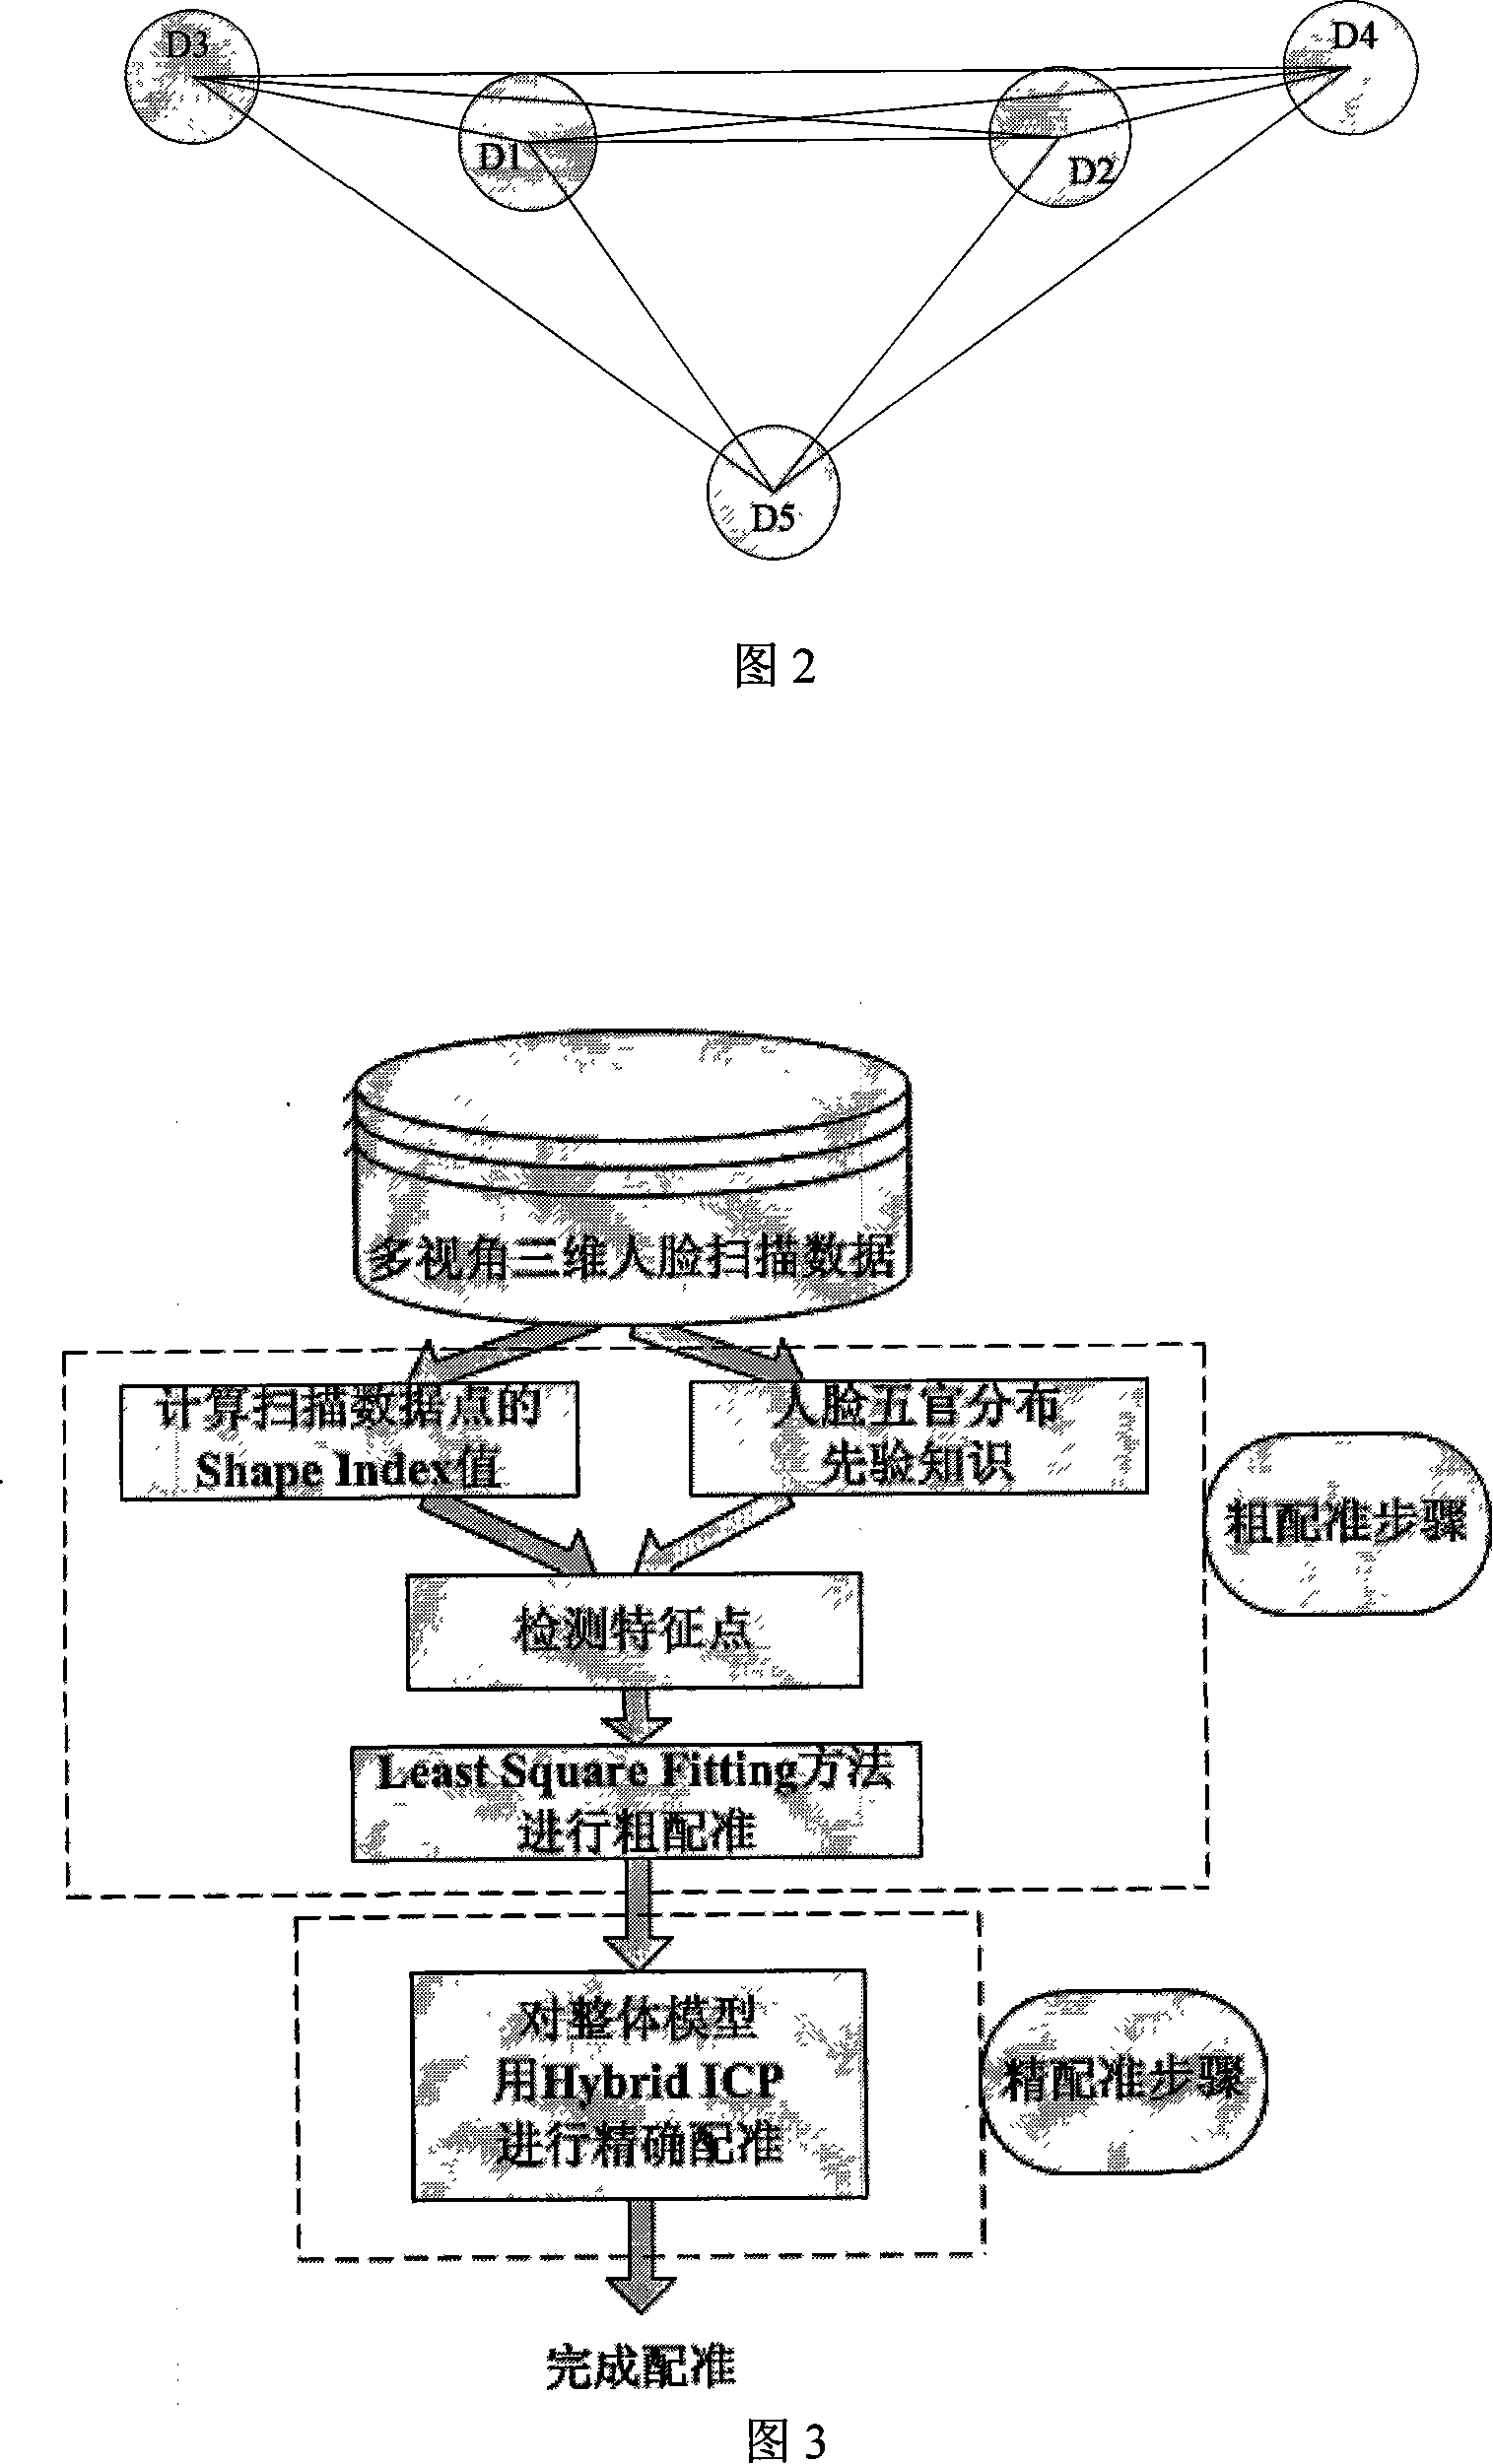 Multi-view angle three-dimensional human face scanning data automatic registration method